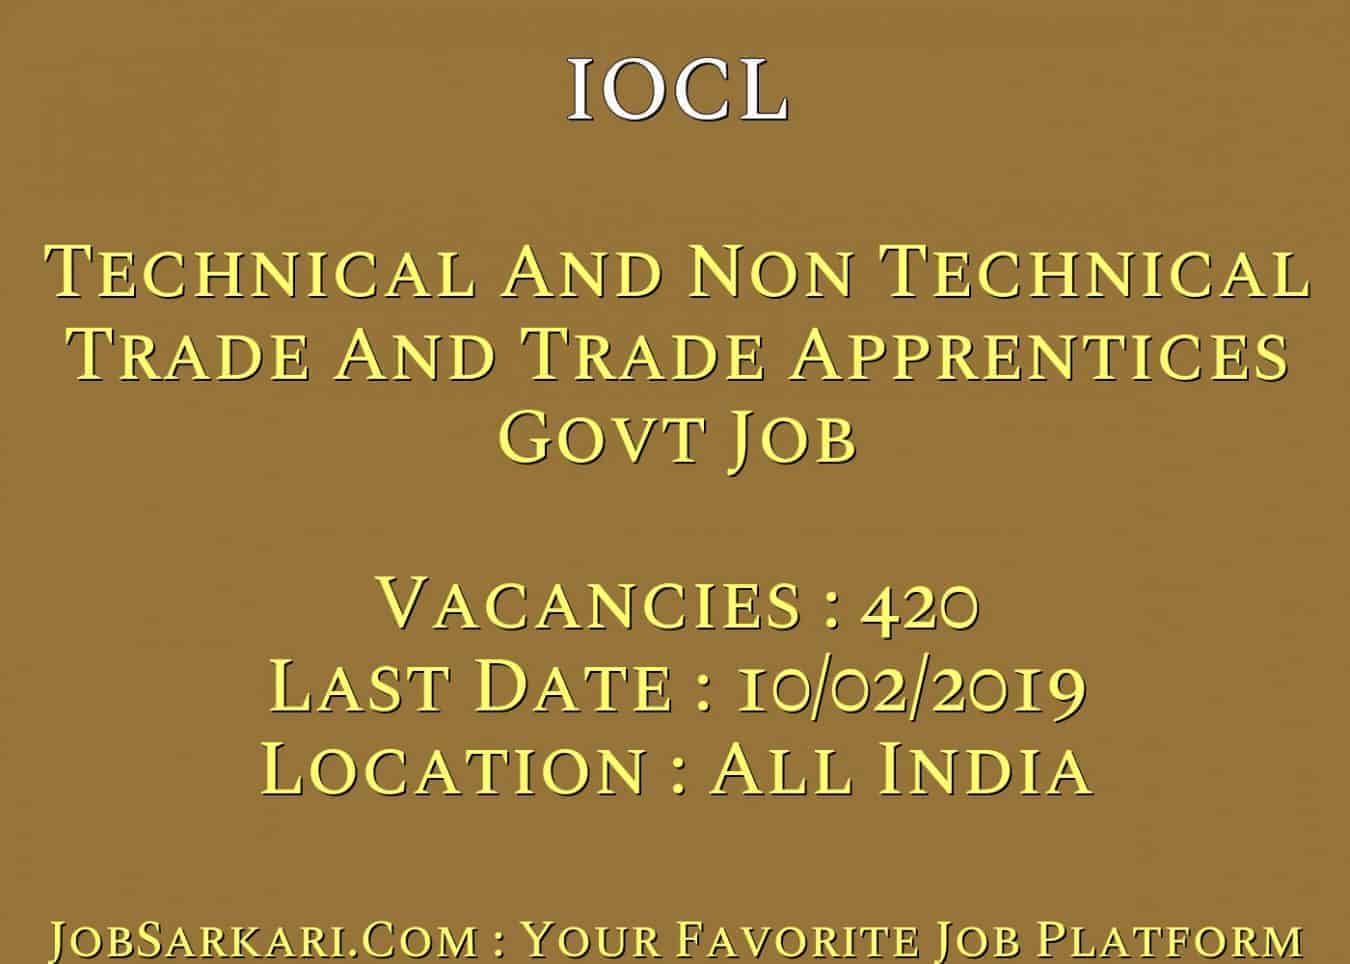 IOCL Recruitment 2019 For Technical And Non Technical Trade And Trade Apprentices Govt Job